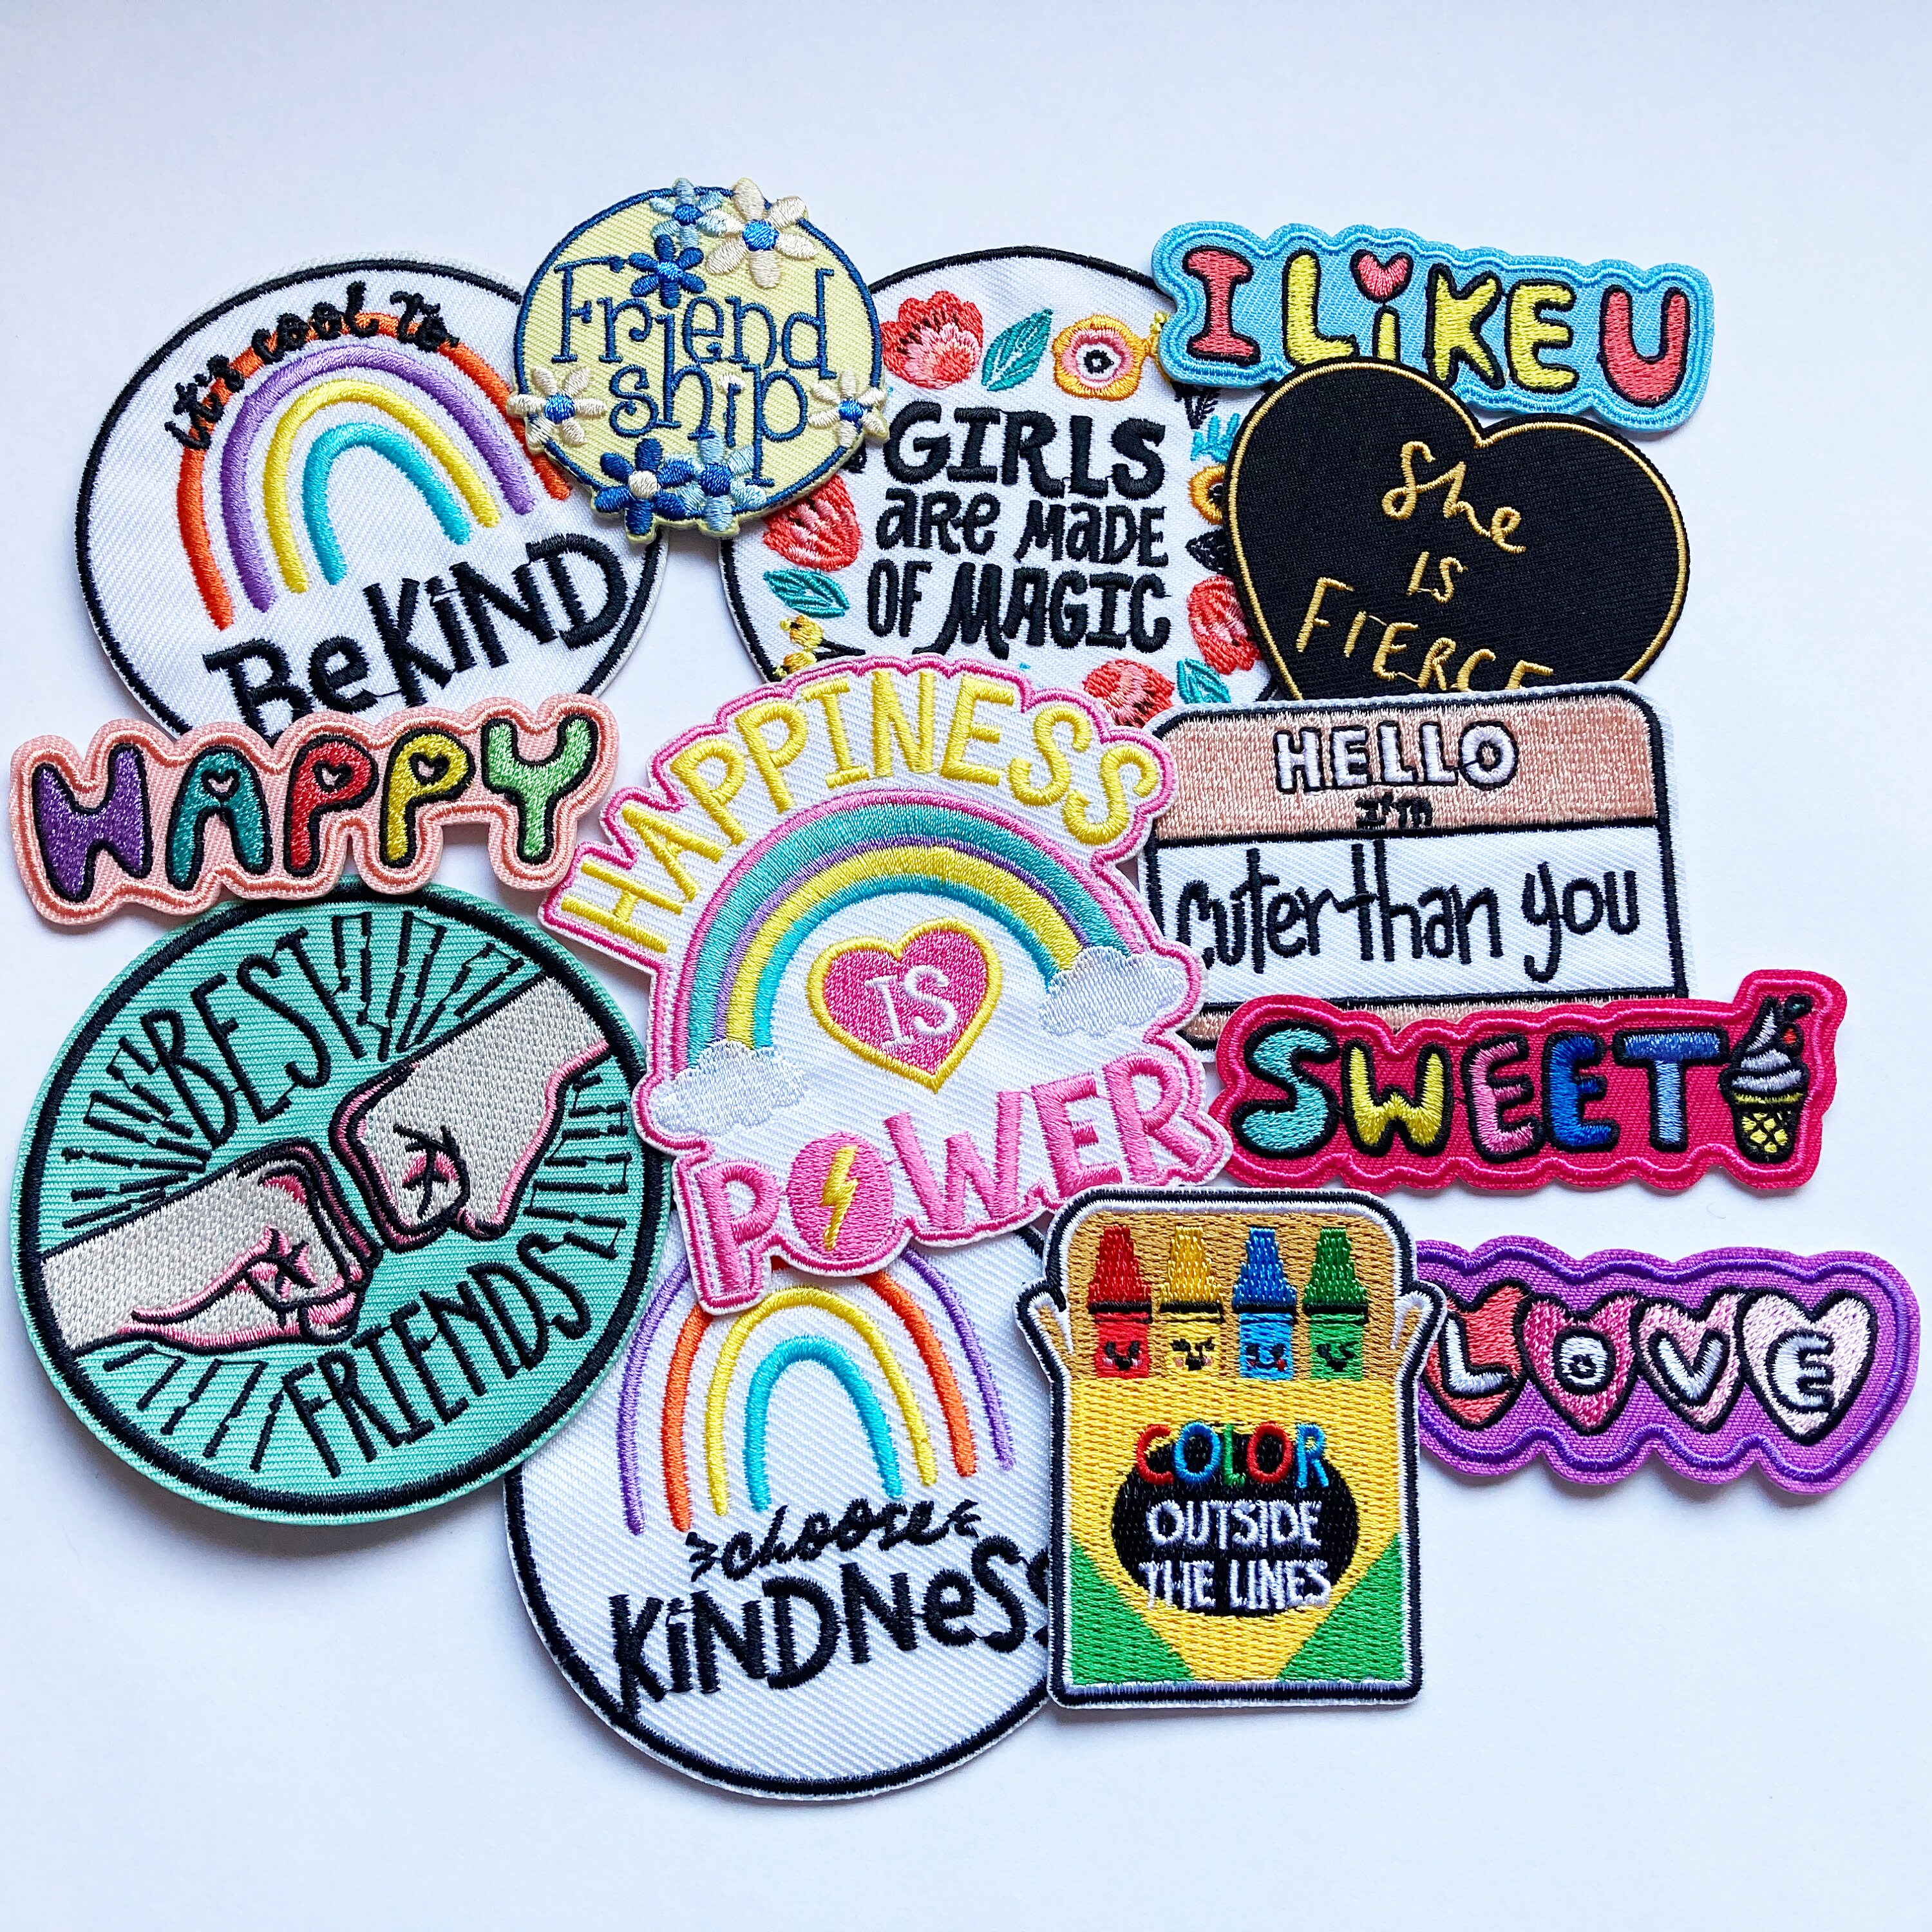 Cute Funny Iron on Patches Happiness, Love, Friendship, Friends